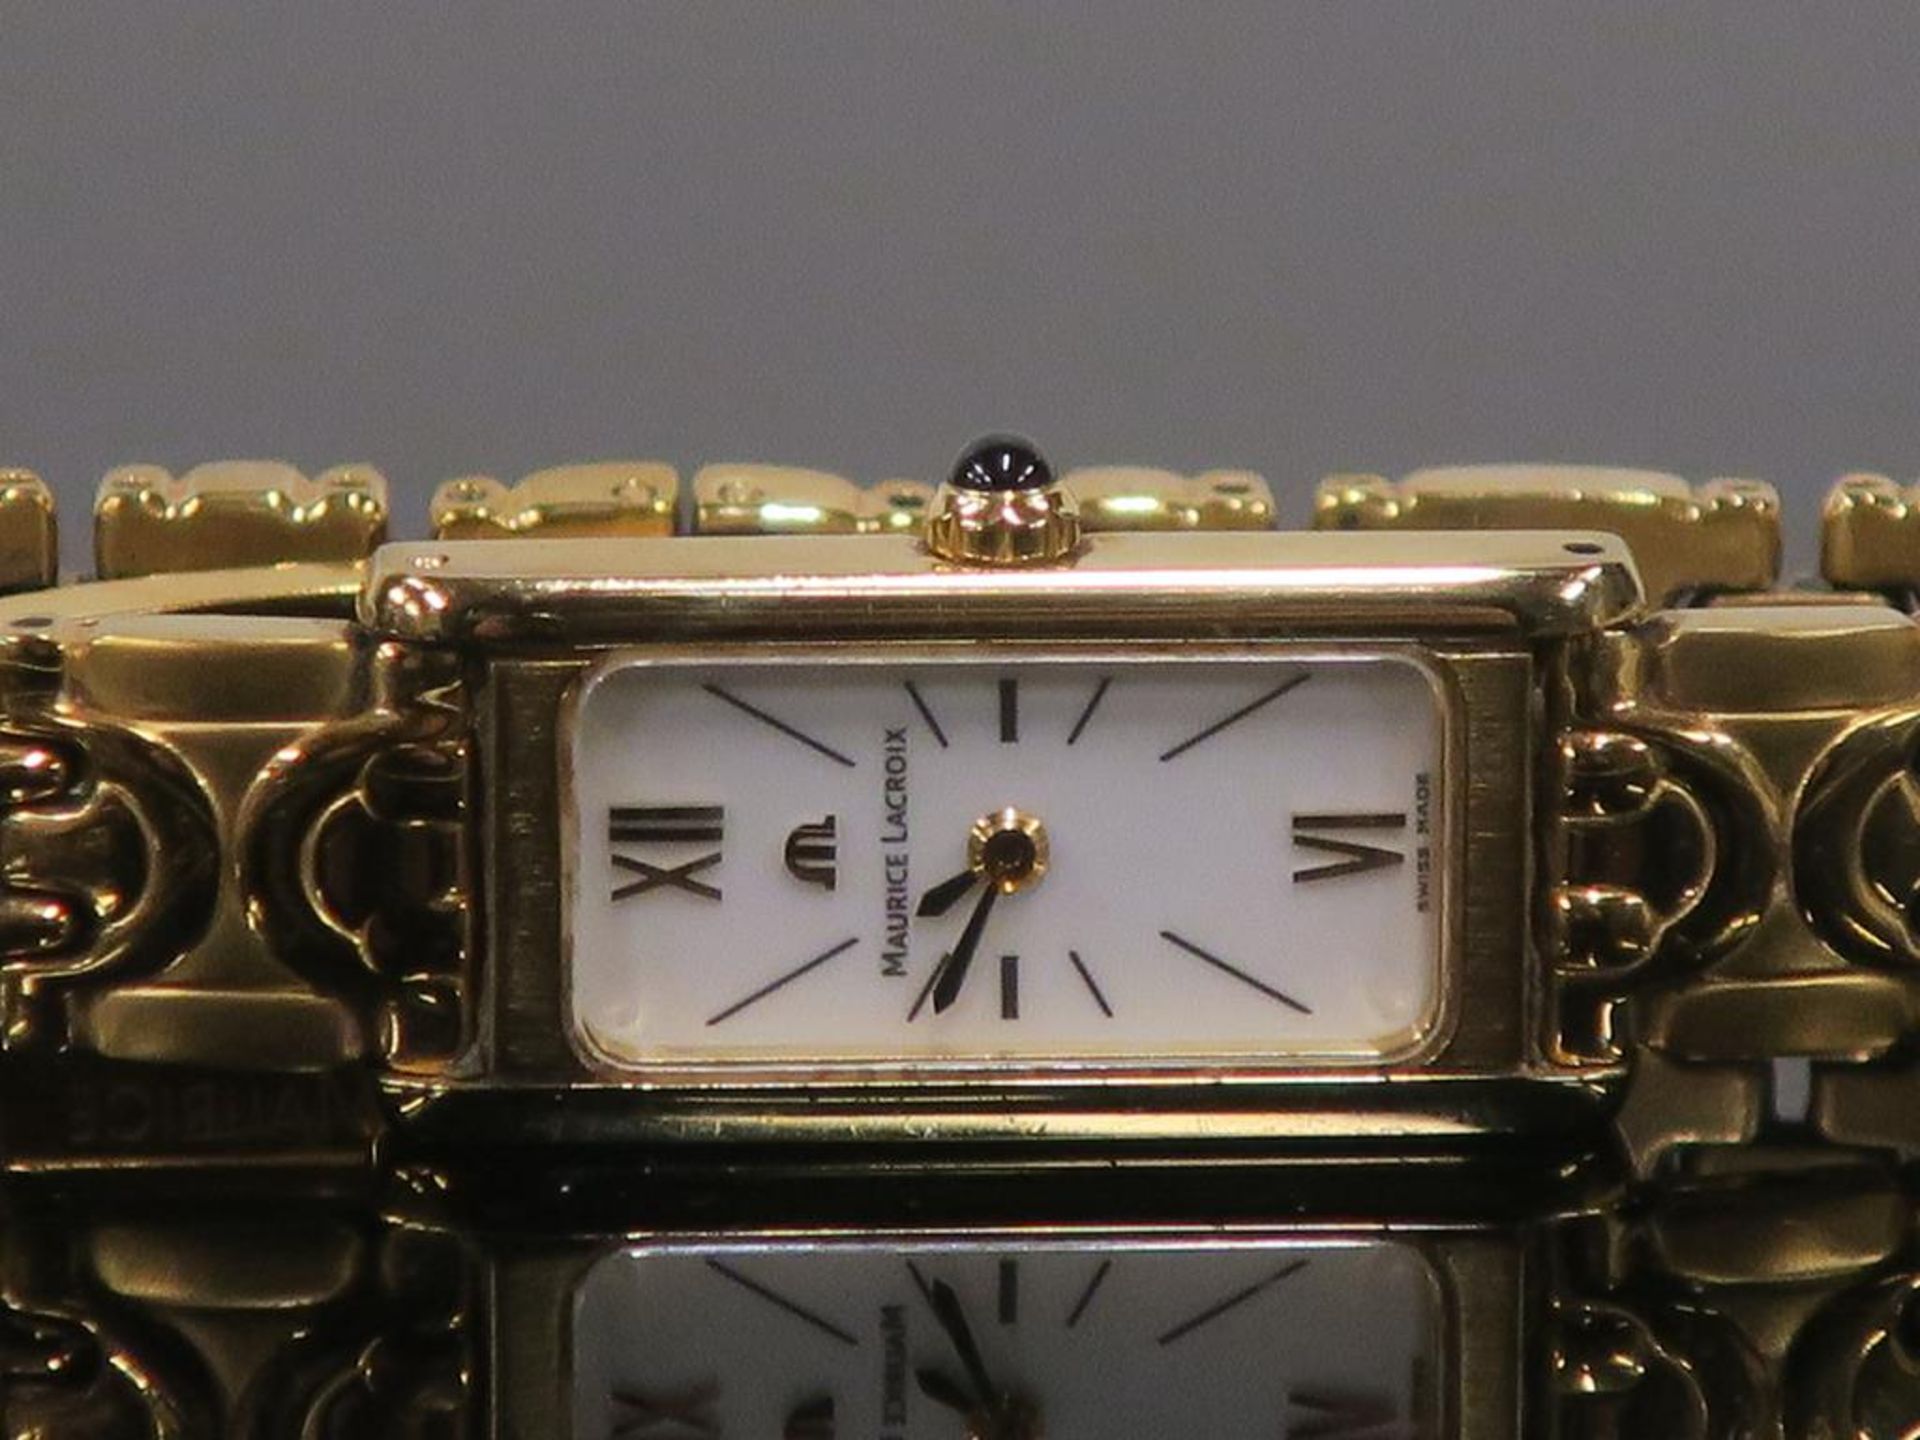 A boxed Maurice Lacroix Swiss made Gold Plated Ladies Watch (est £80-£100) - Image 3 of 4